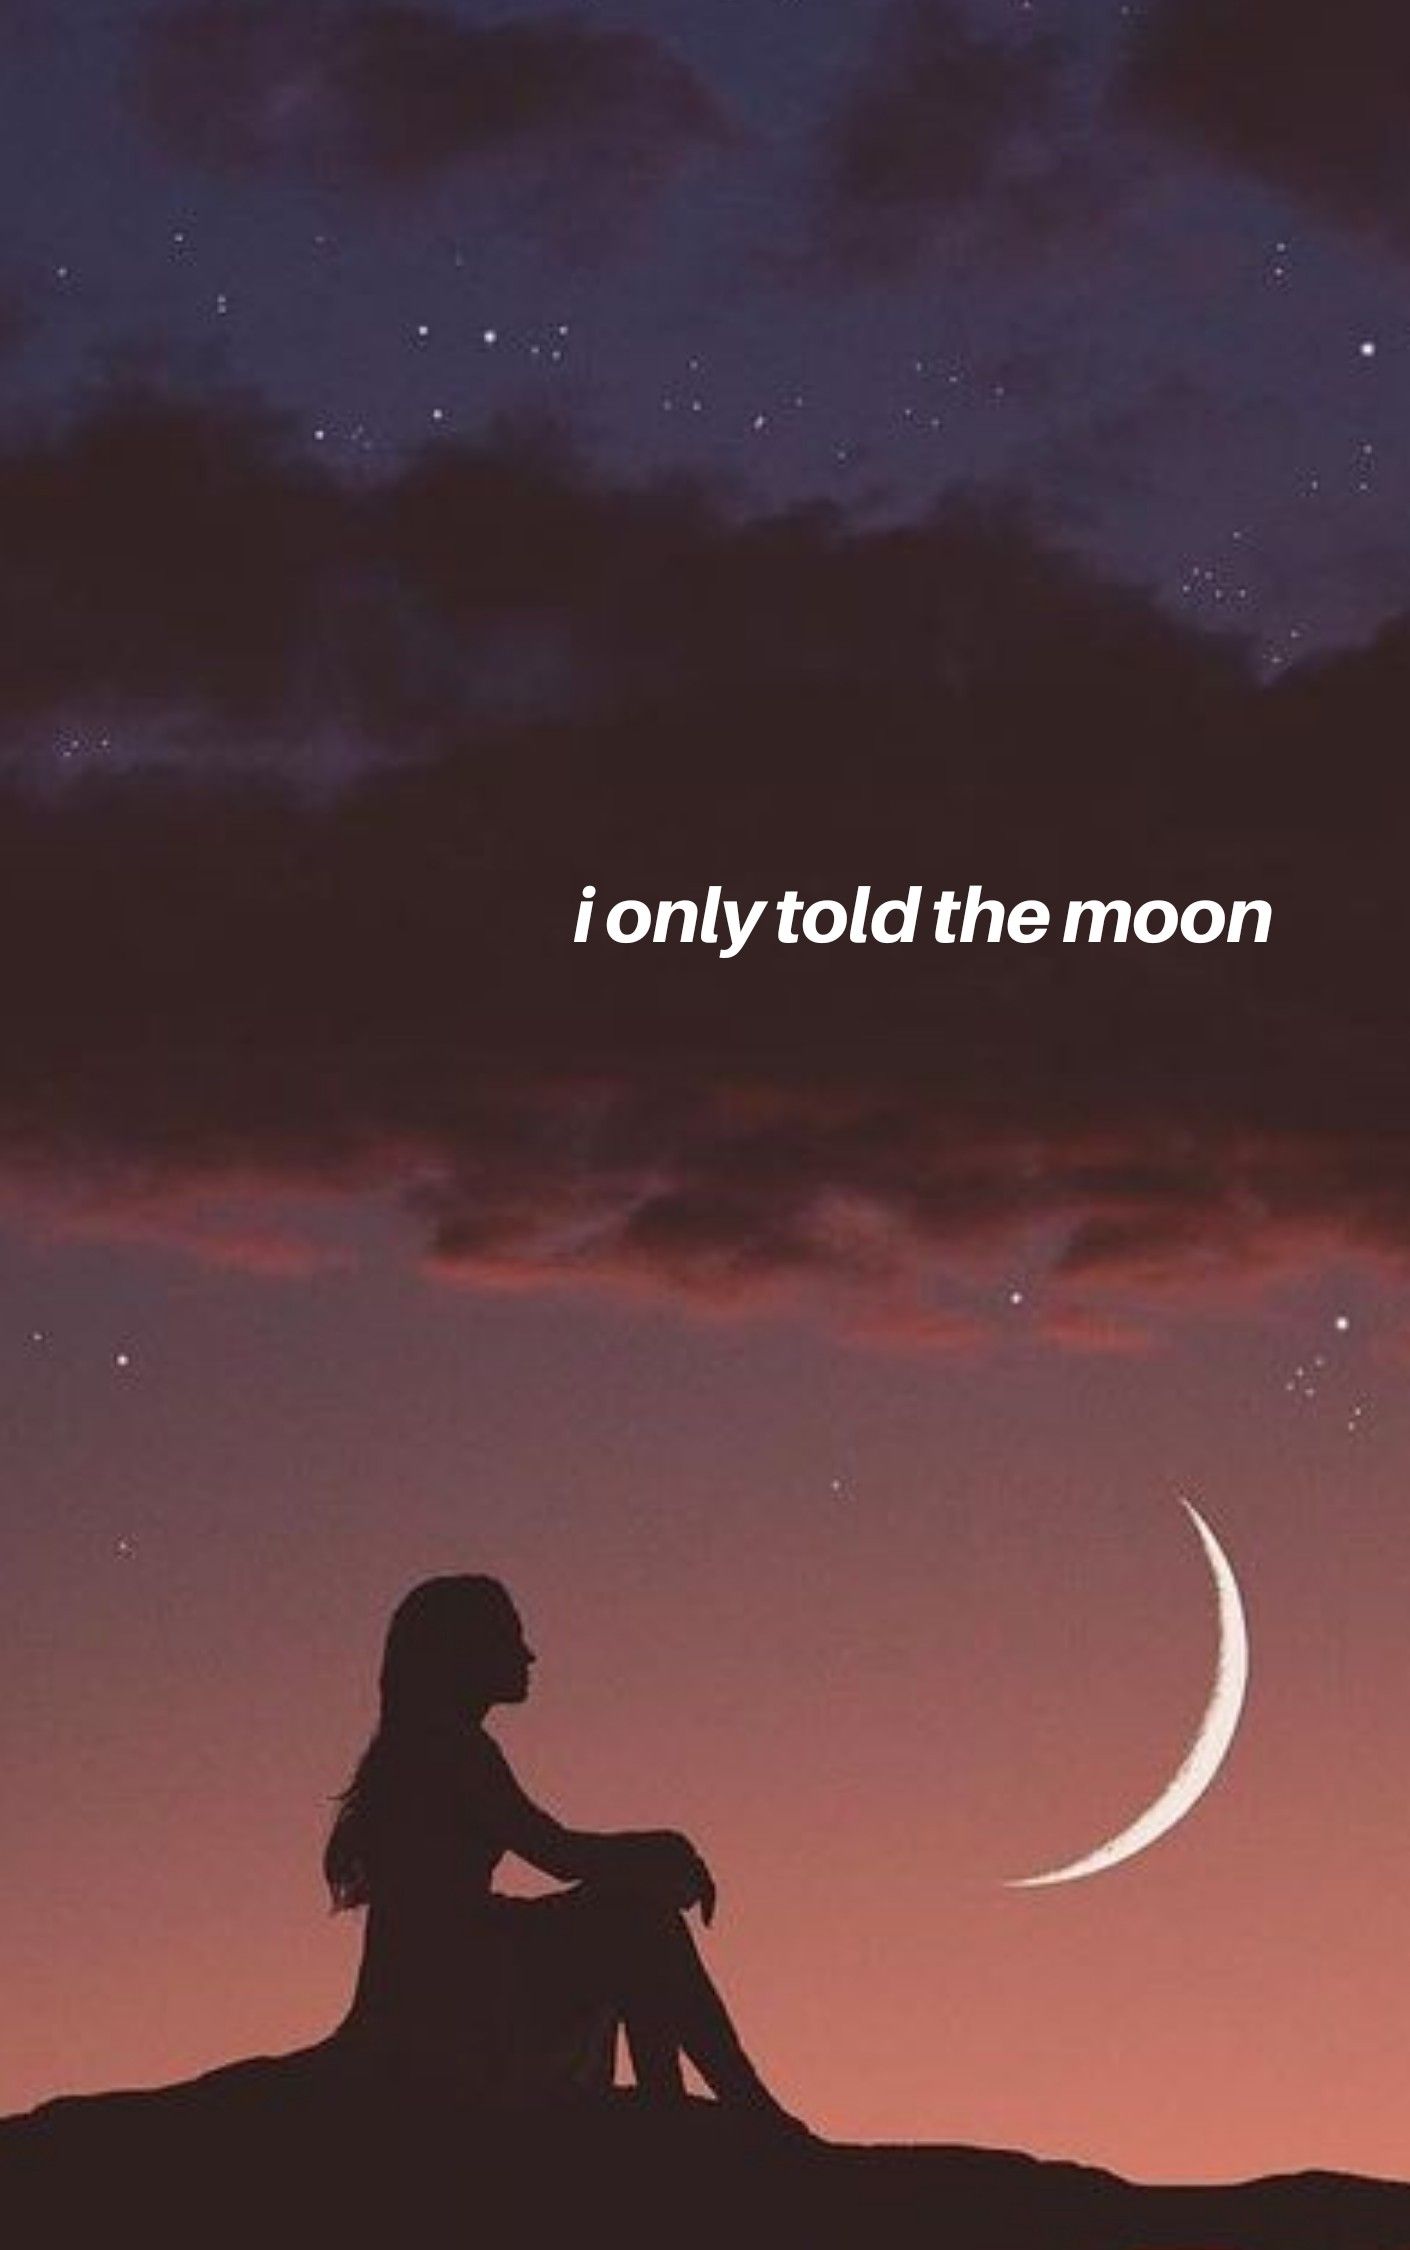 I only told the moon by Camila Cabello lyric wallpaper. Moon and stars wallpaper, Moon and star quotes, Moon quotes